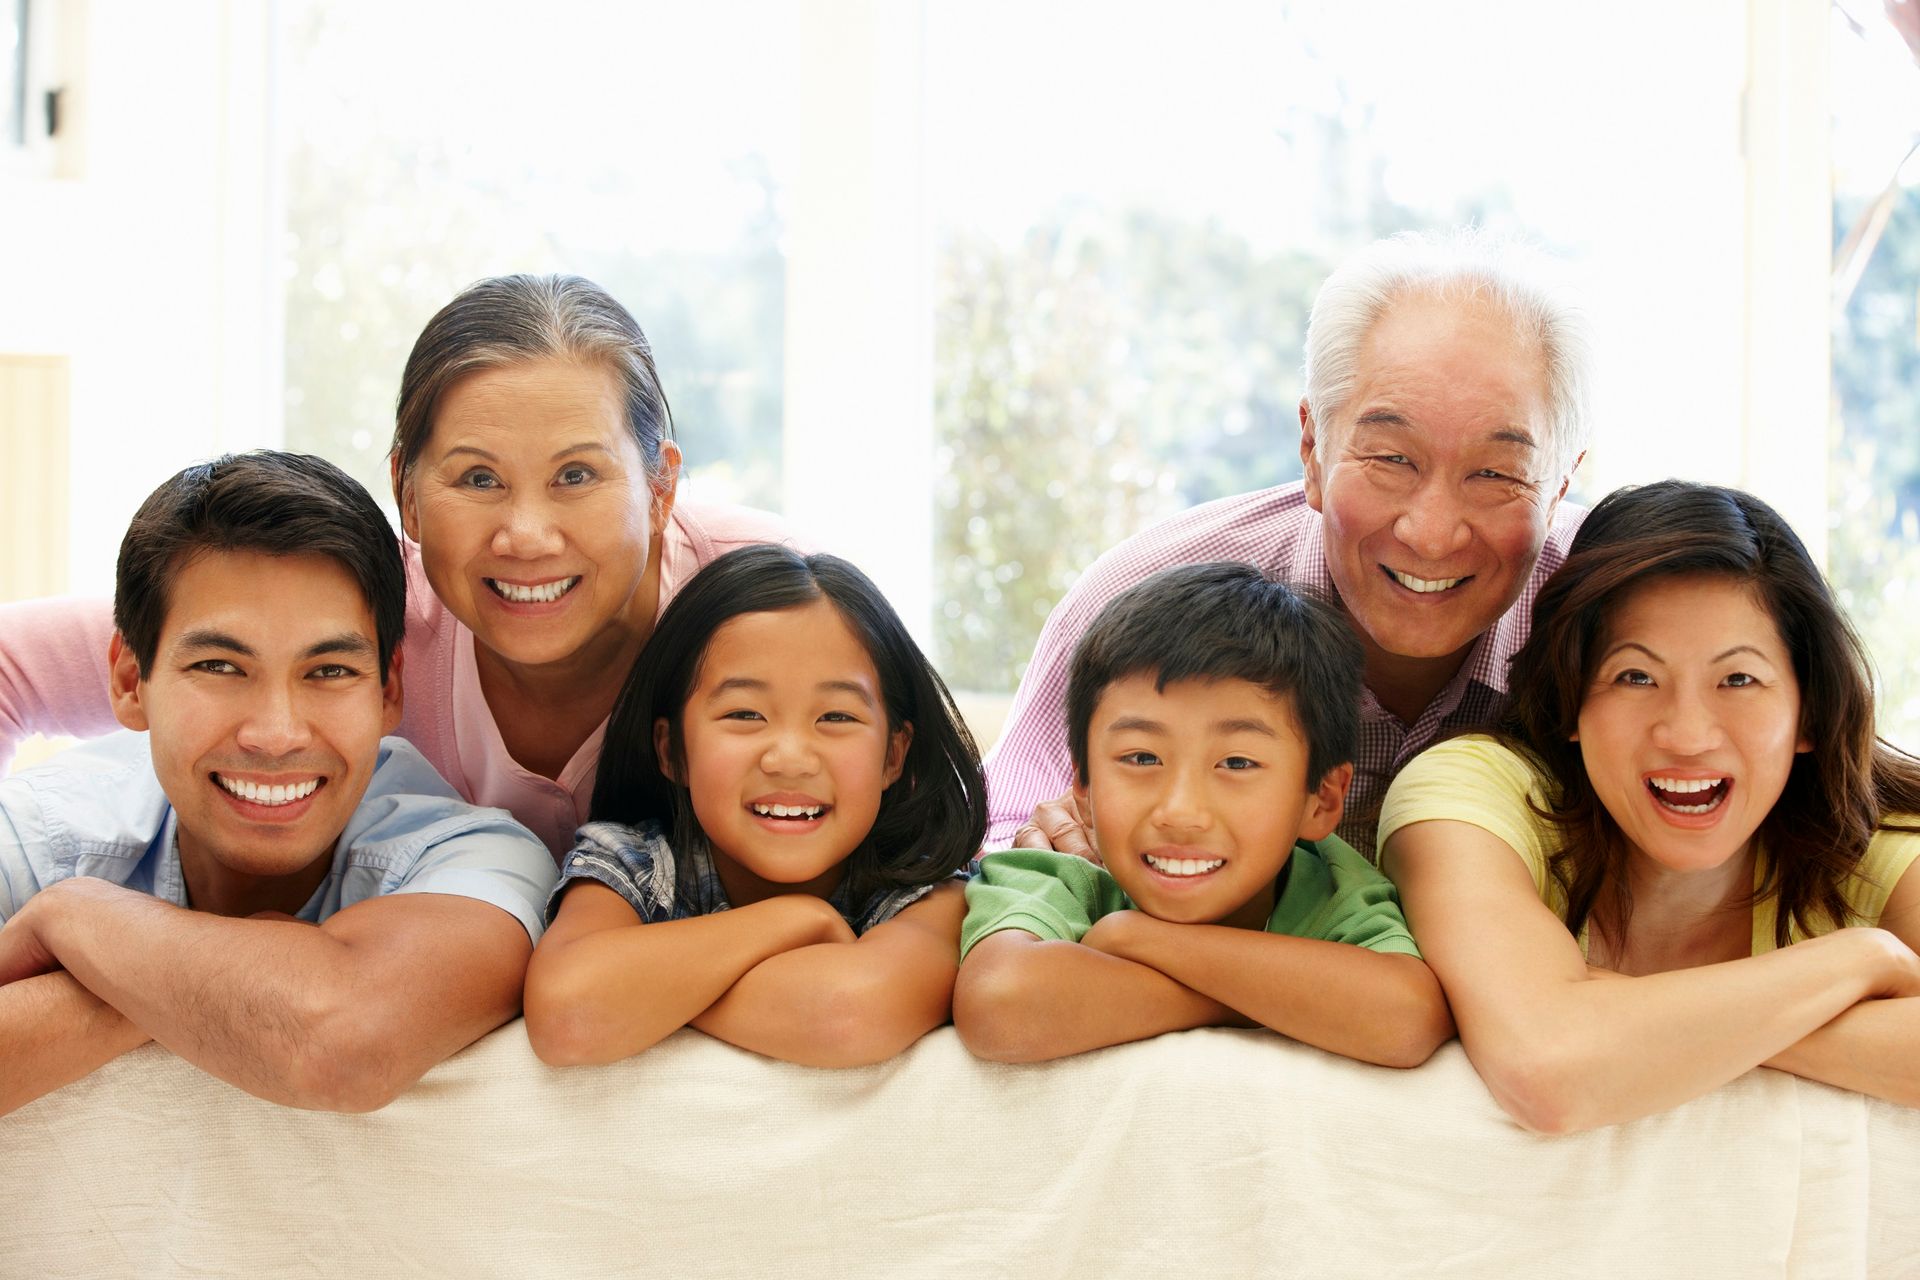 A family is laying on a couch with their arms crossed and smiling.